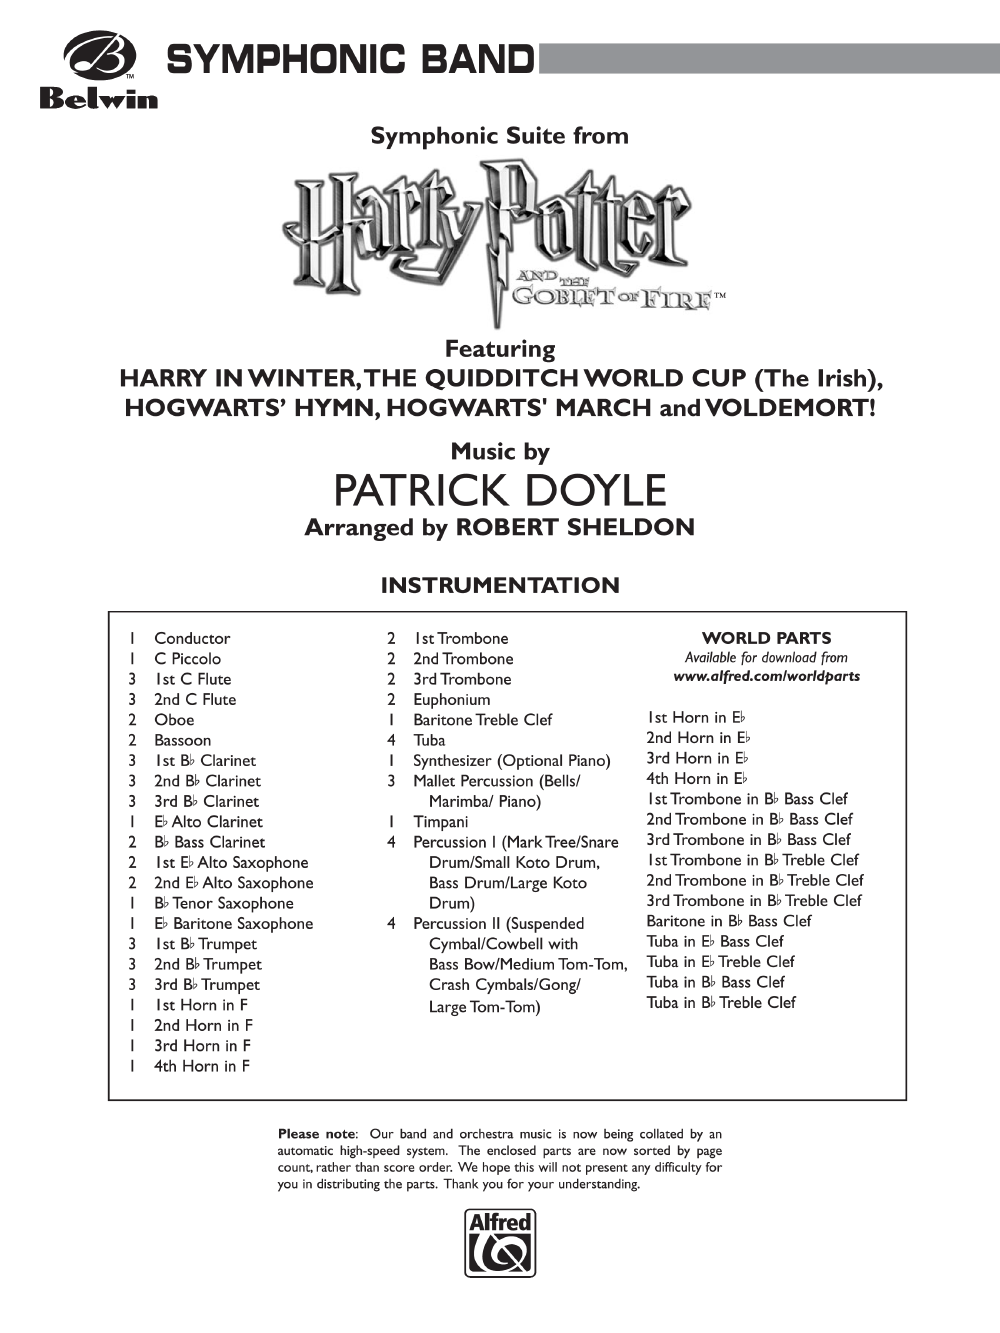 HARRY POTTER AND THE GOBLET OF FIRE SYMPHONIC SUITE